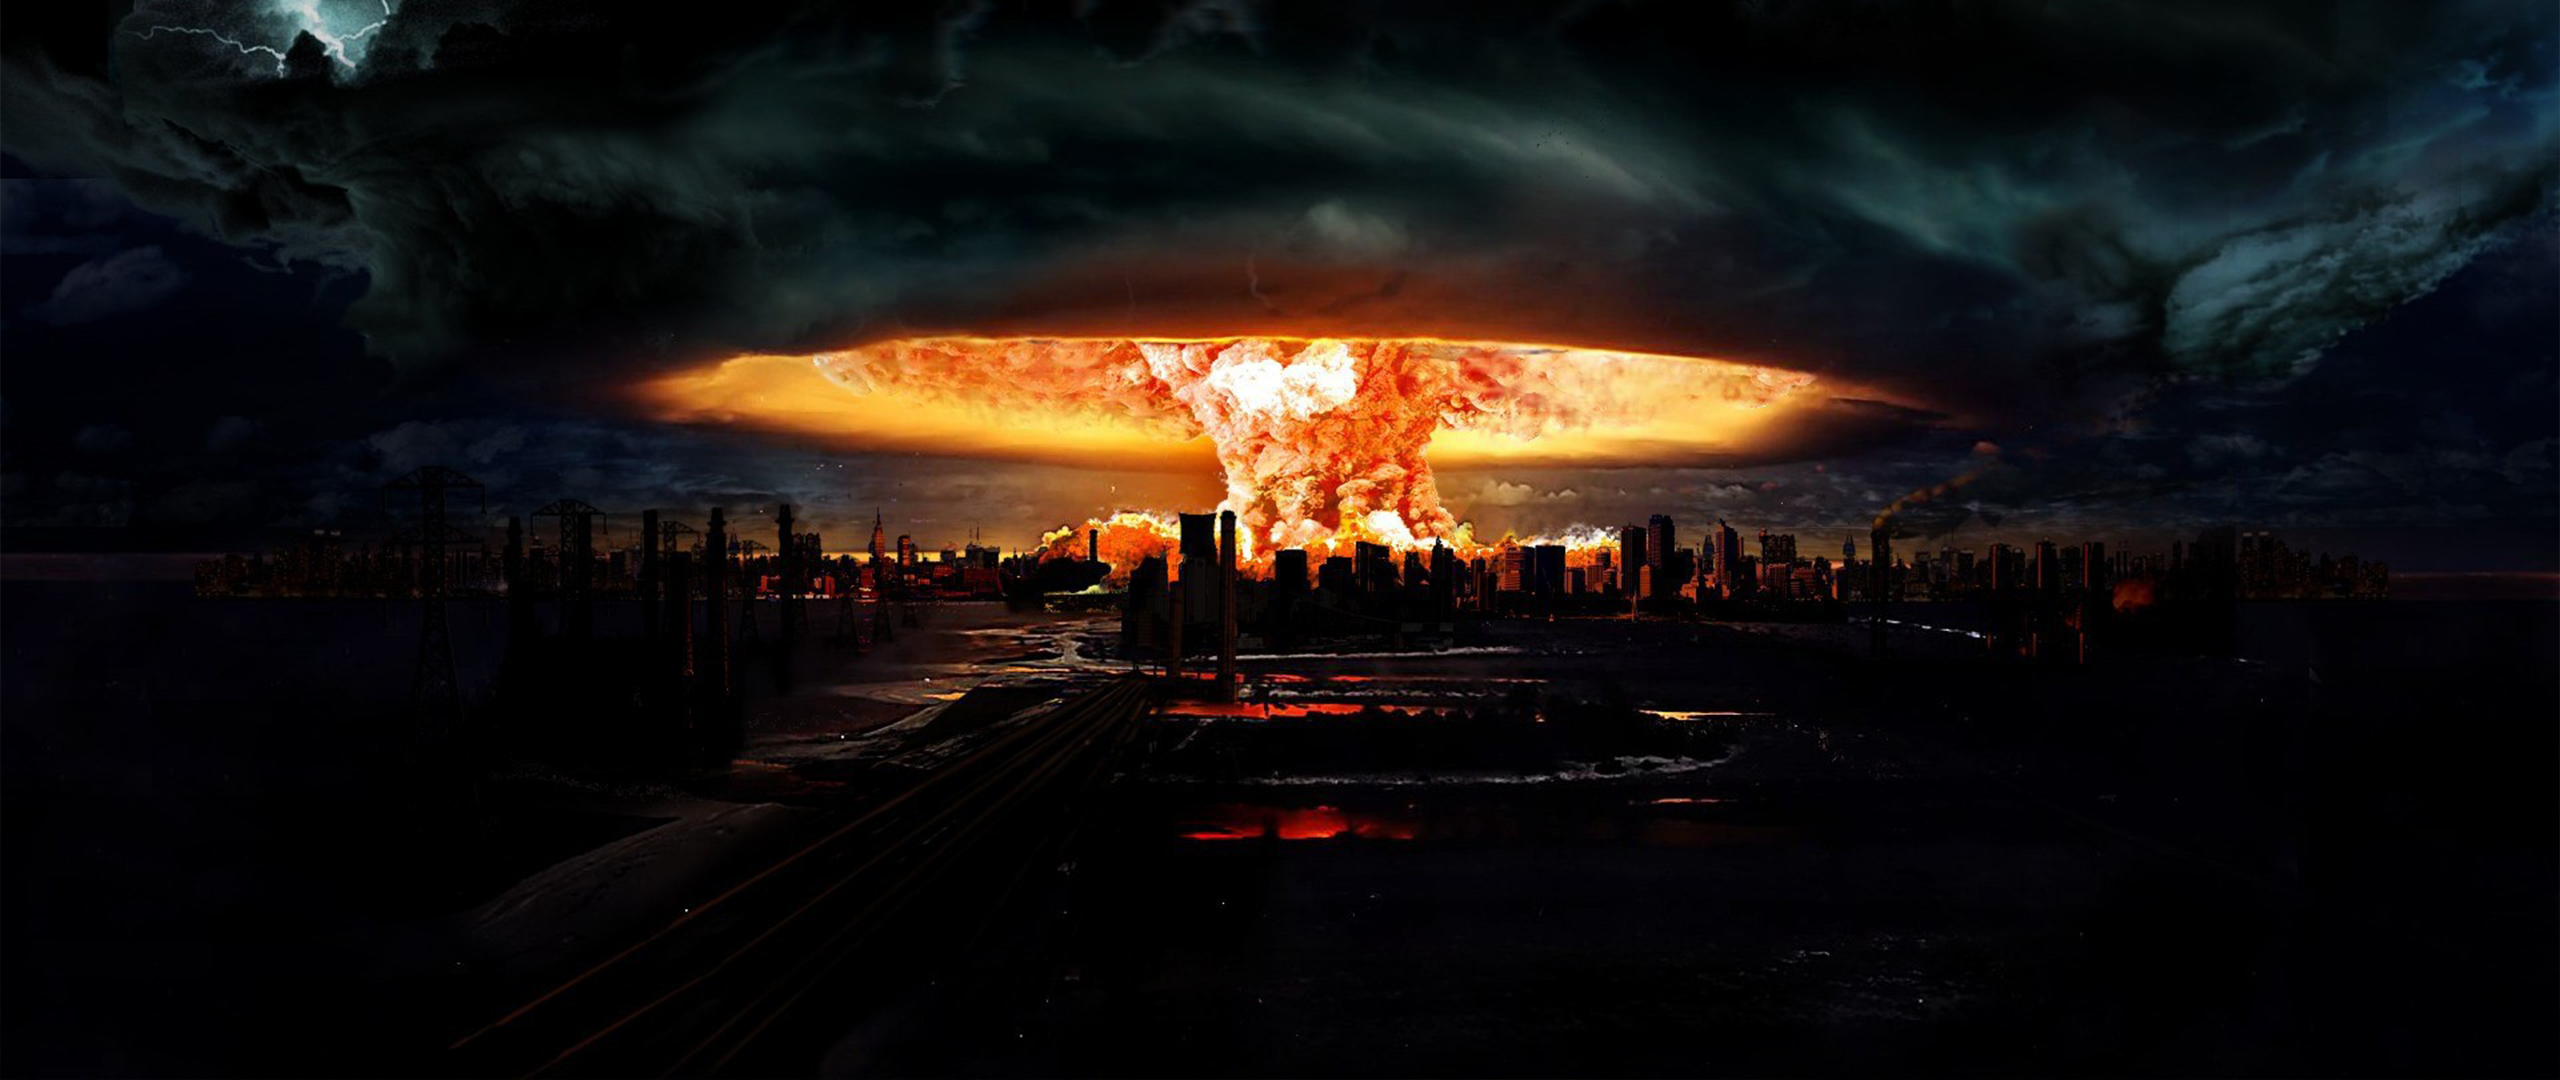 Ultra Wide Photography Dark Apocalyptic Mushroom Clouds Explosion 2560x1080